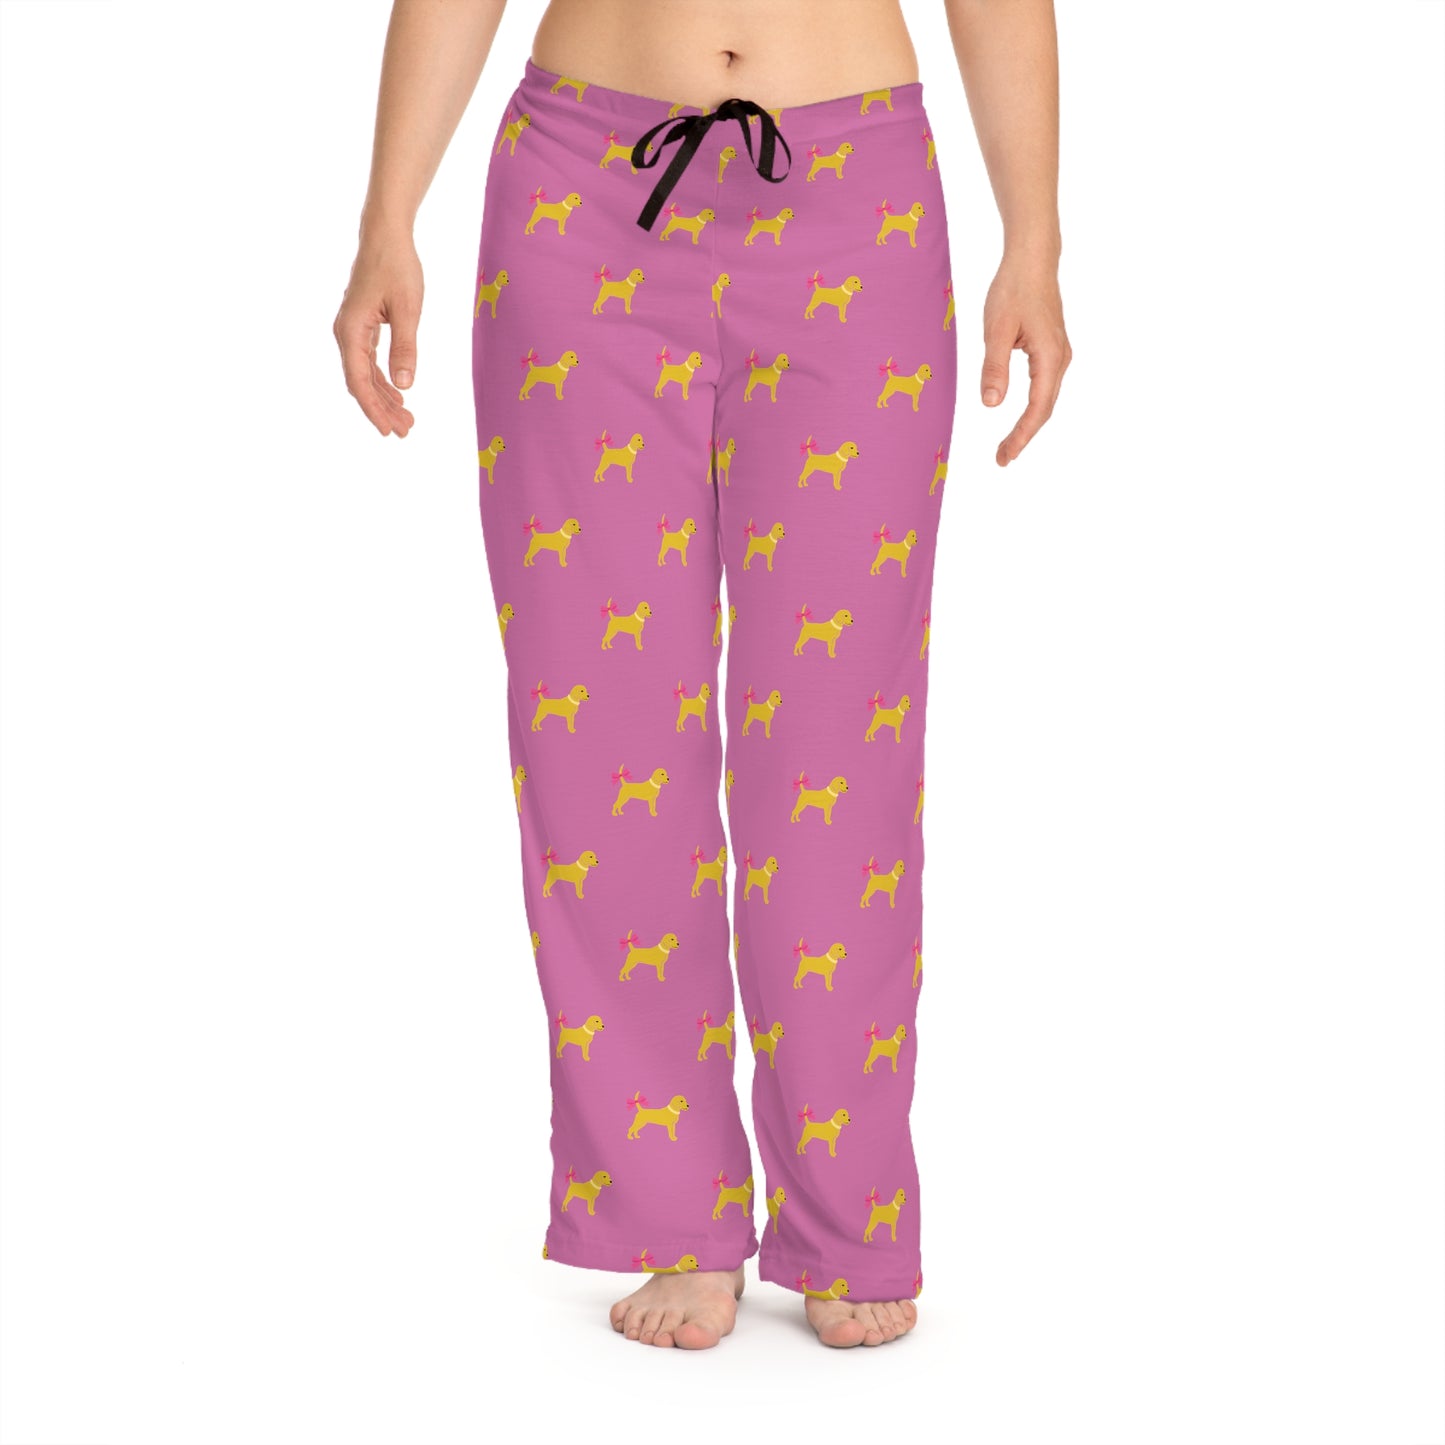 Little Yellow Dog with Bow Women's Pajama Pants